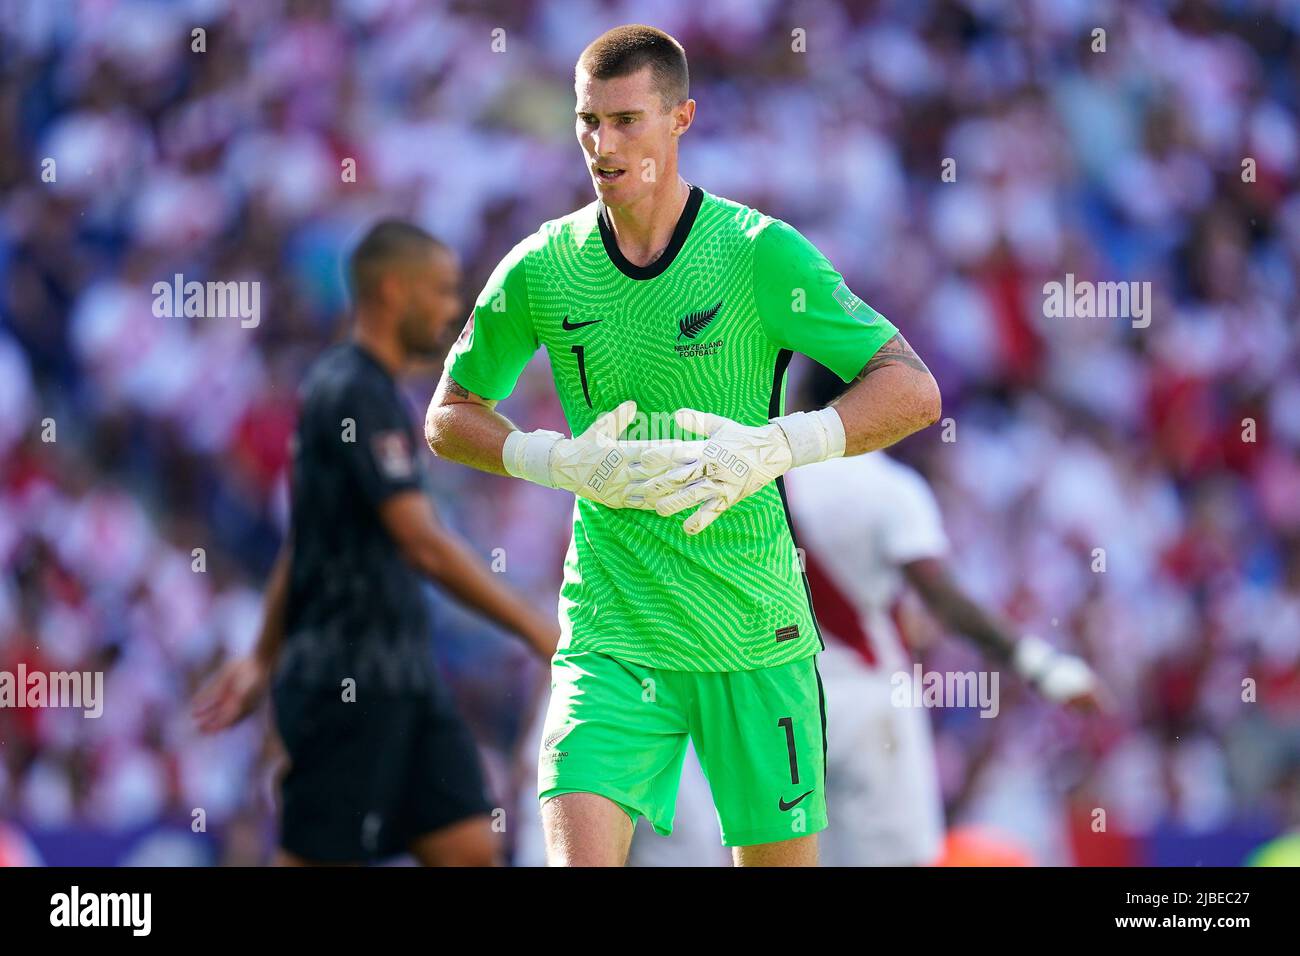 Barcelona, Spain. June 5, 2022, Oliver Sail of New Zealand during the friendly match between Peru and New Zealand played at RCDE Stadium on June 5, 2022 in Barcelona, Spain. (Photo by Bagu Blanco / PRESSINPHOTO) Stock Photo